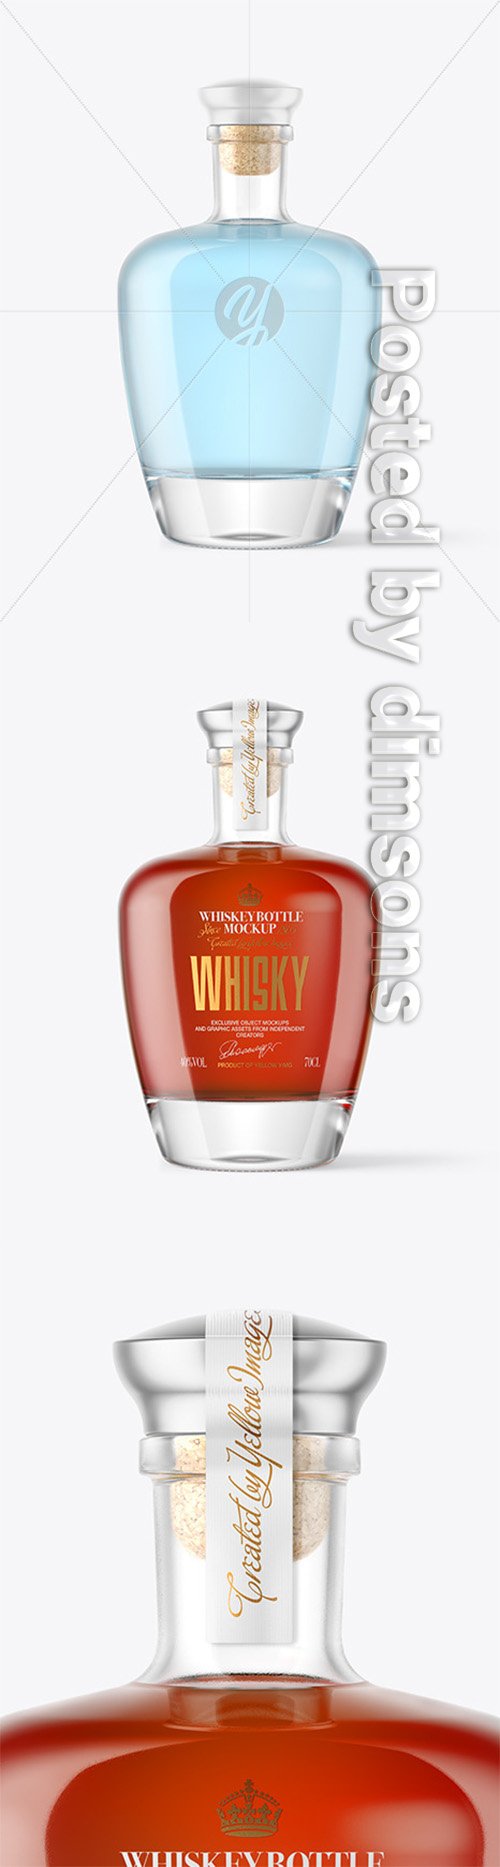 Clear Glass Bottle with Alcohol Drink Mockup 63893